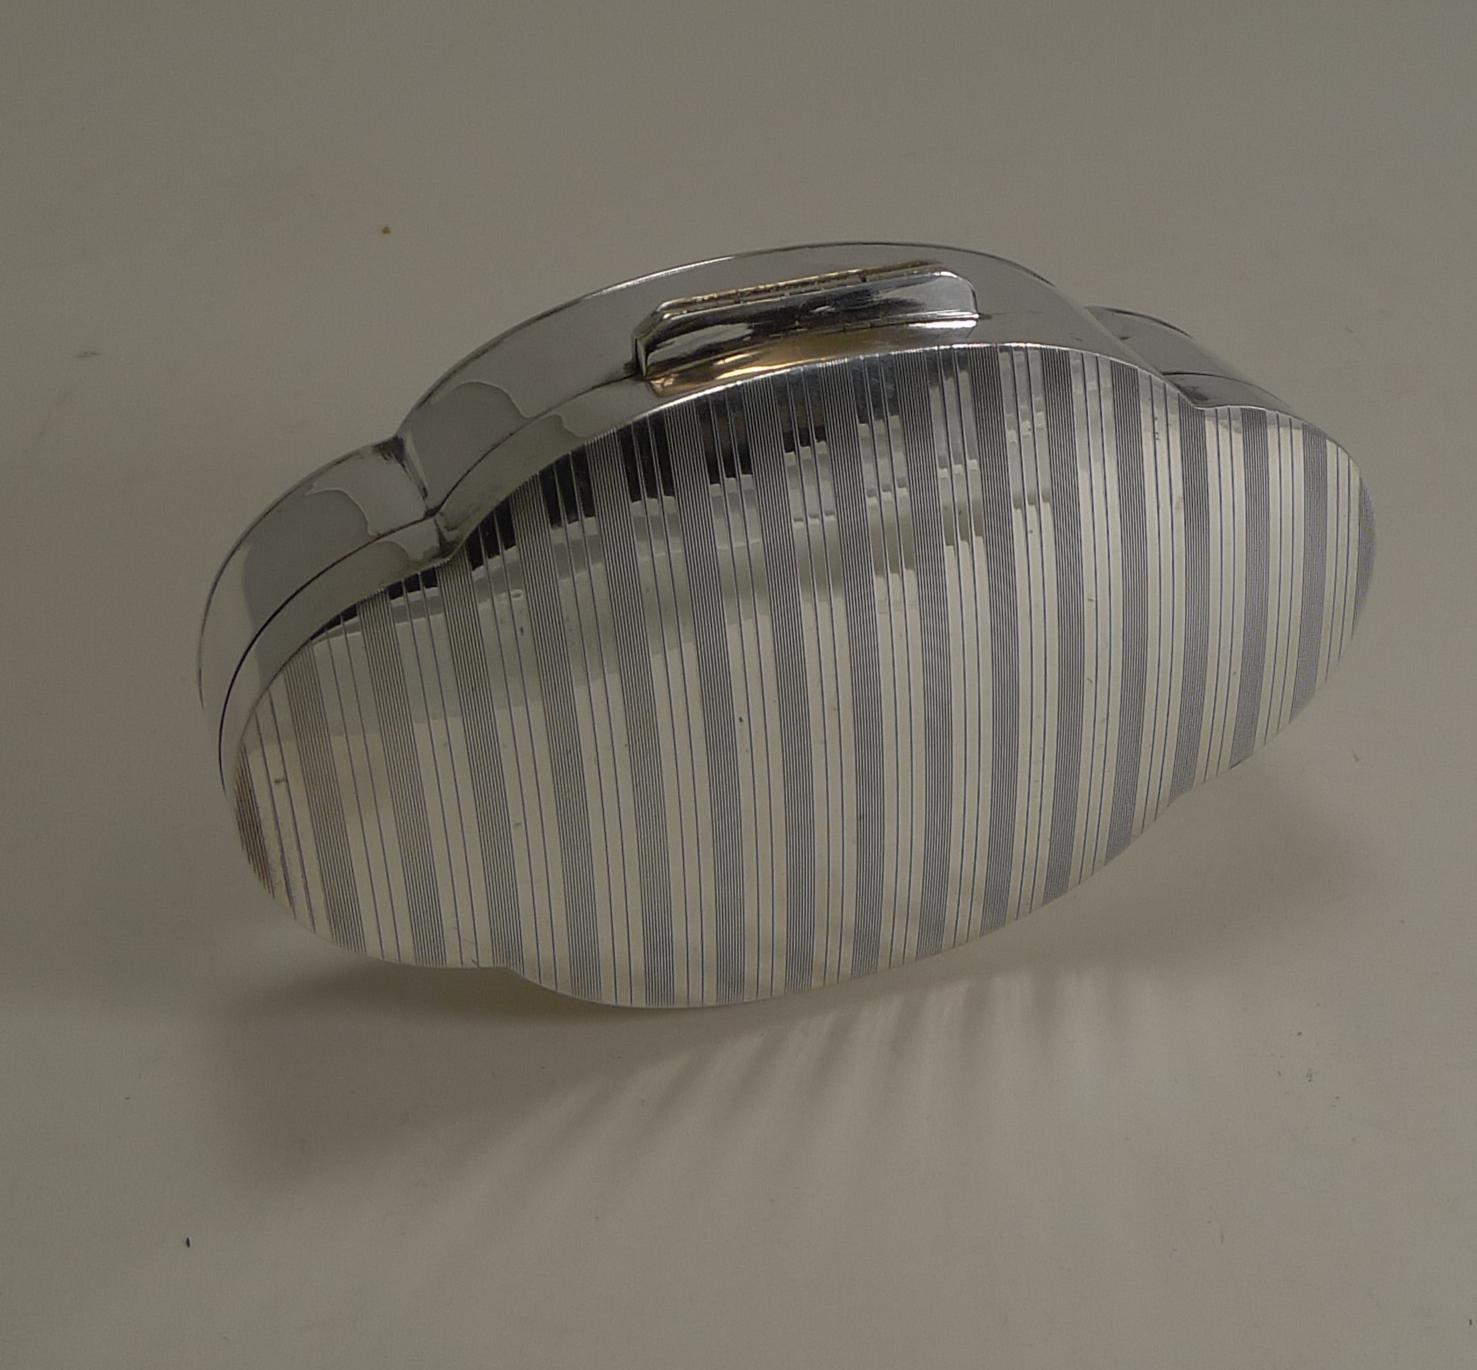 This is a really smart box, perfect for either a lady or gentleman. Made from solid English sterling silver the box has a good weight of 4.75 troy ounces / 147.8 grams.

The shaped box has a slightly domed lid with an all over striped engine